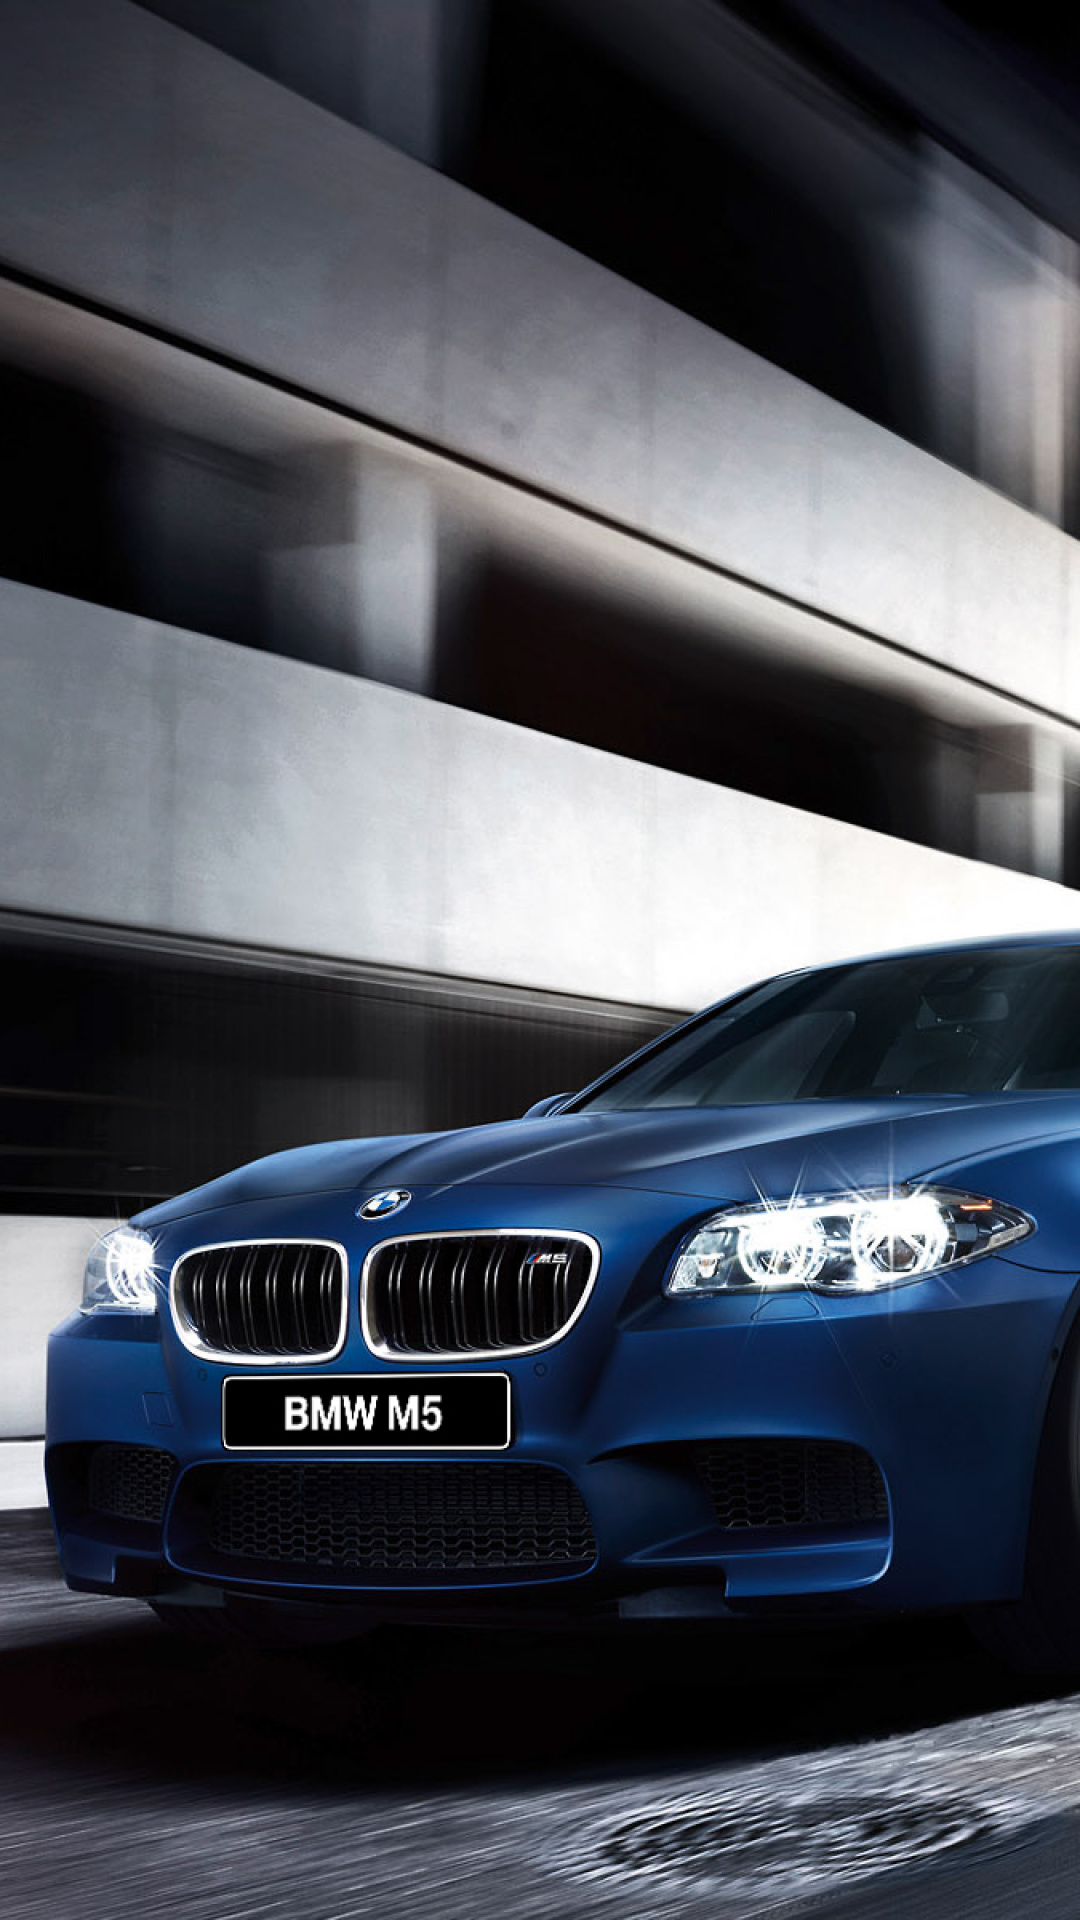 Bmw M5 F10 Wallpaper For Iphone 7 Plus